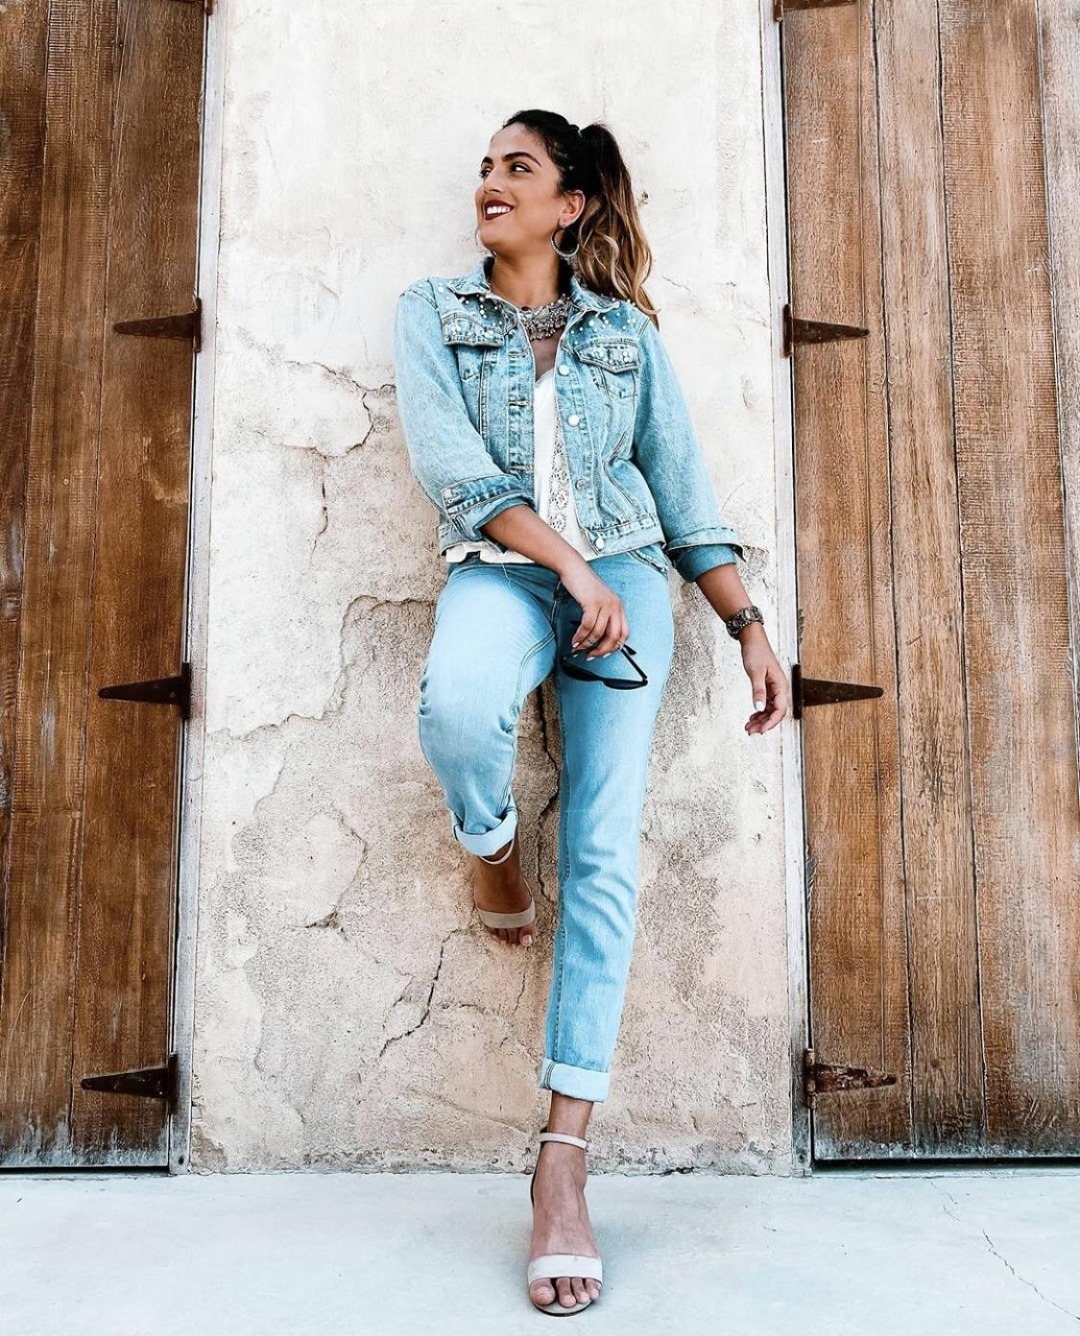 Gap Middle East - What's your favorite Gap denim styles? 👖⁣
#GapDenim⁣
📸  @beautybarbysaba